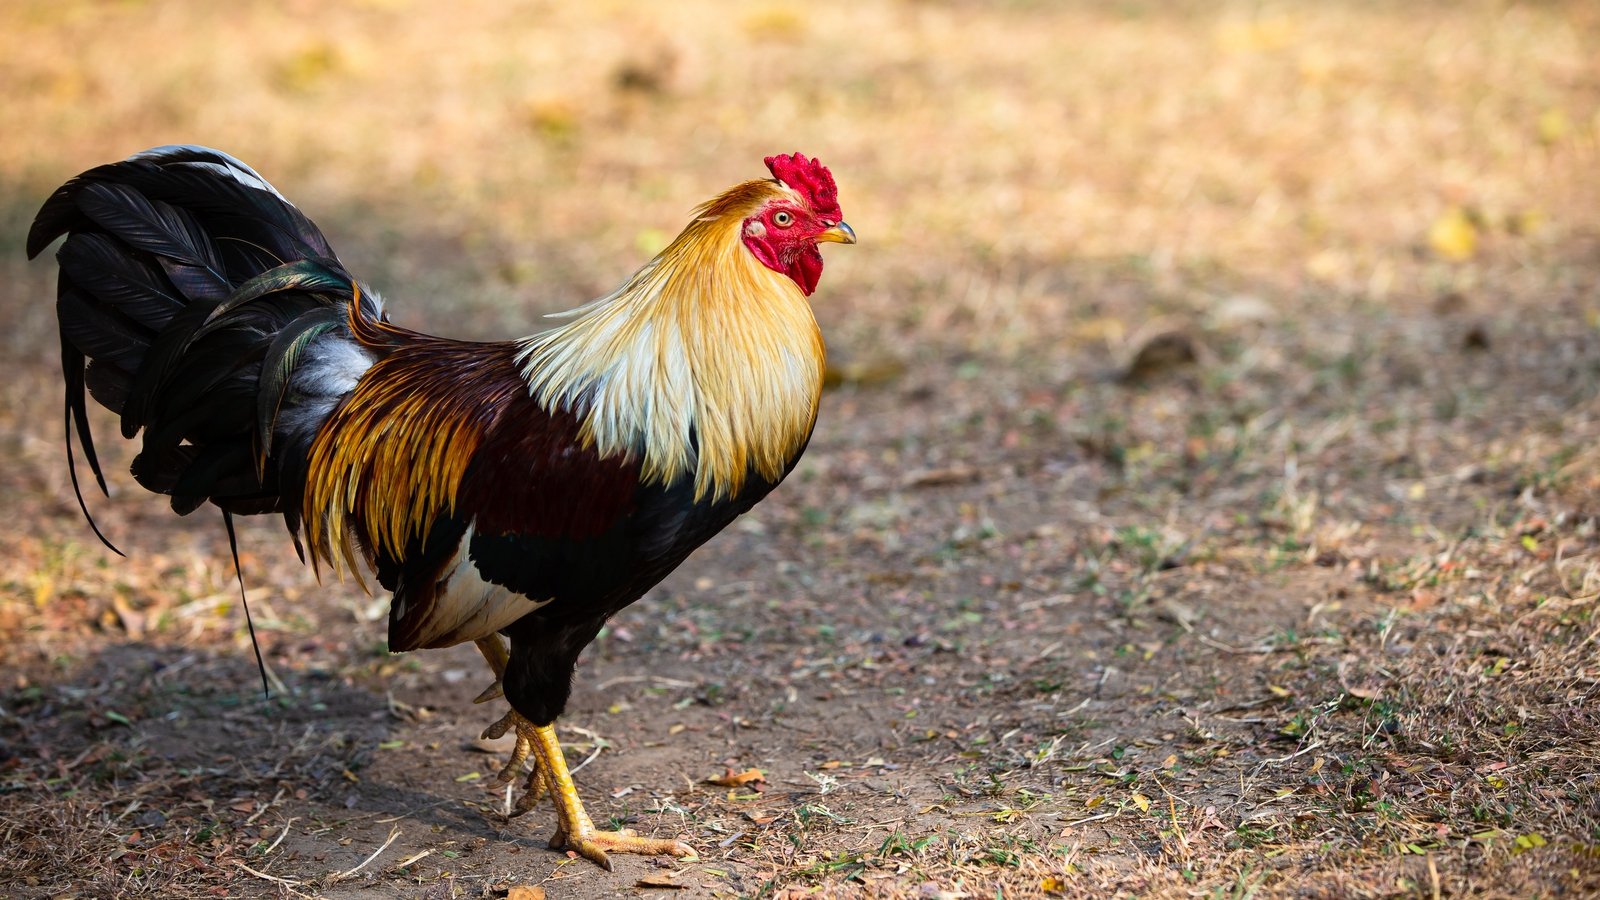 Man Killed By Rooster At Illegal Cockfight In India